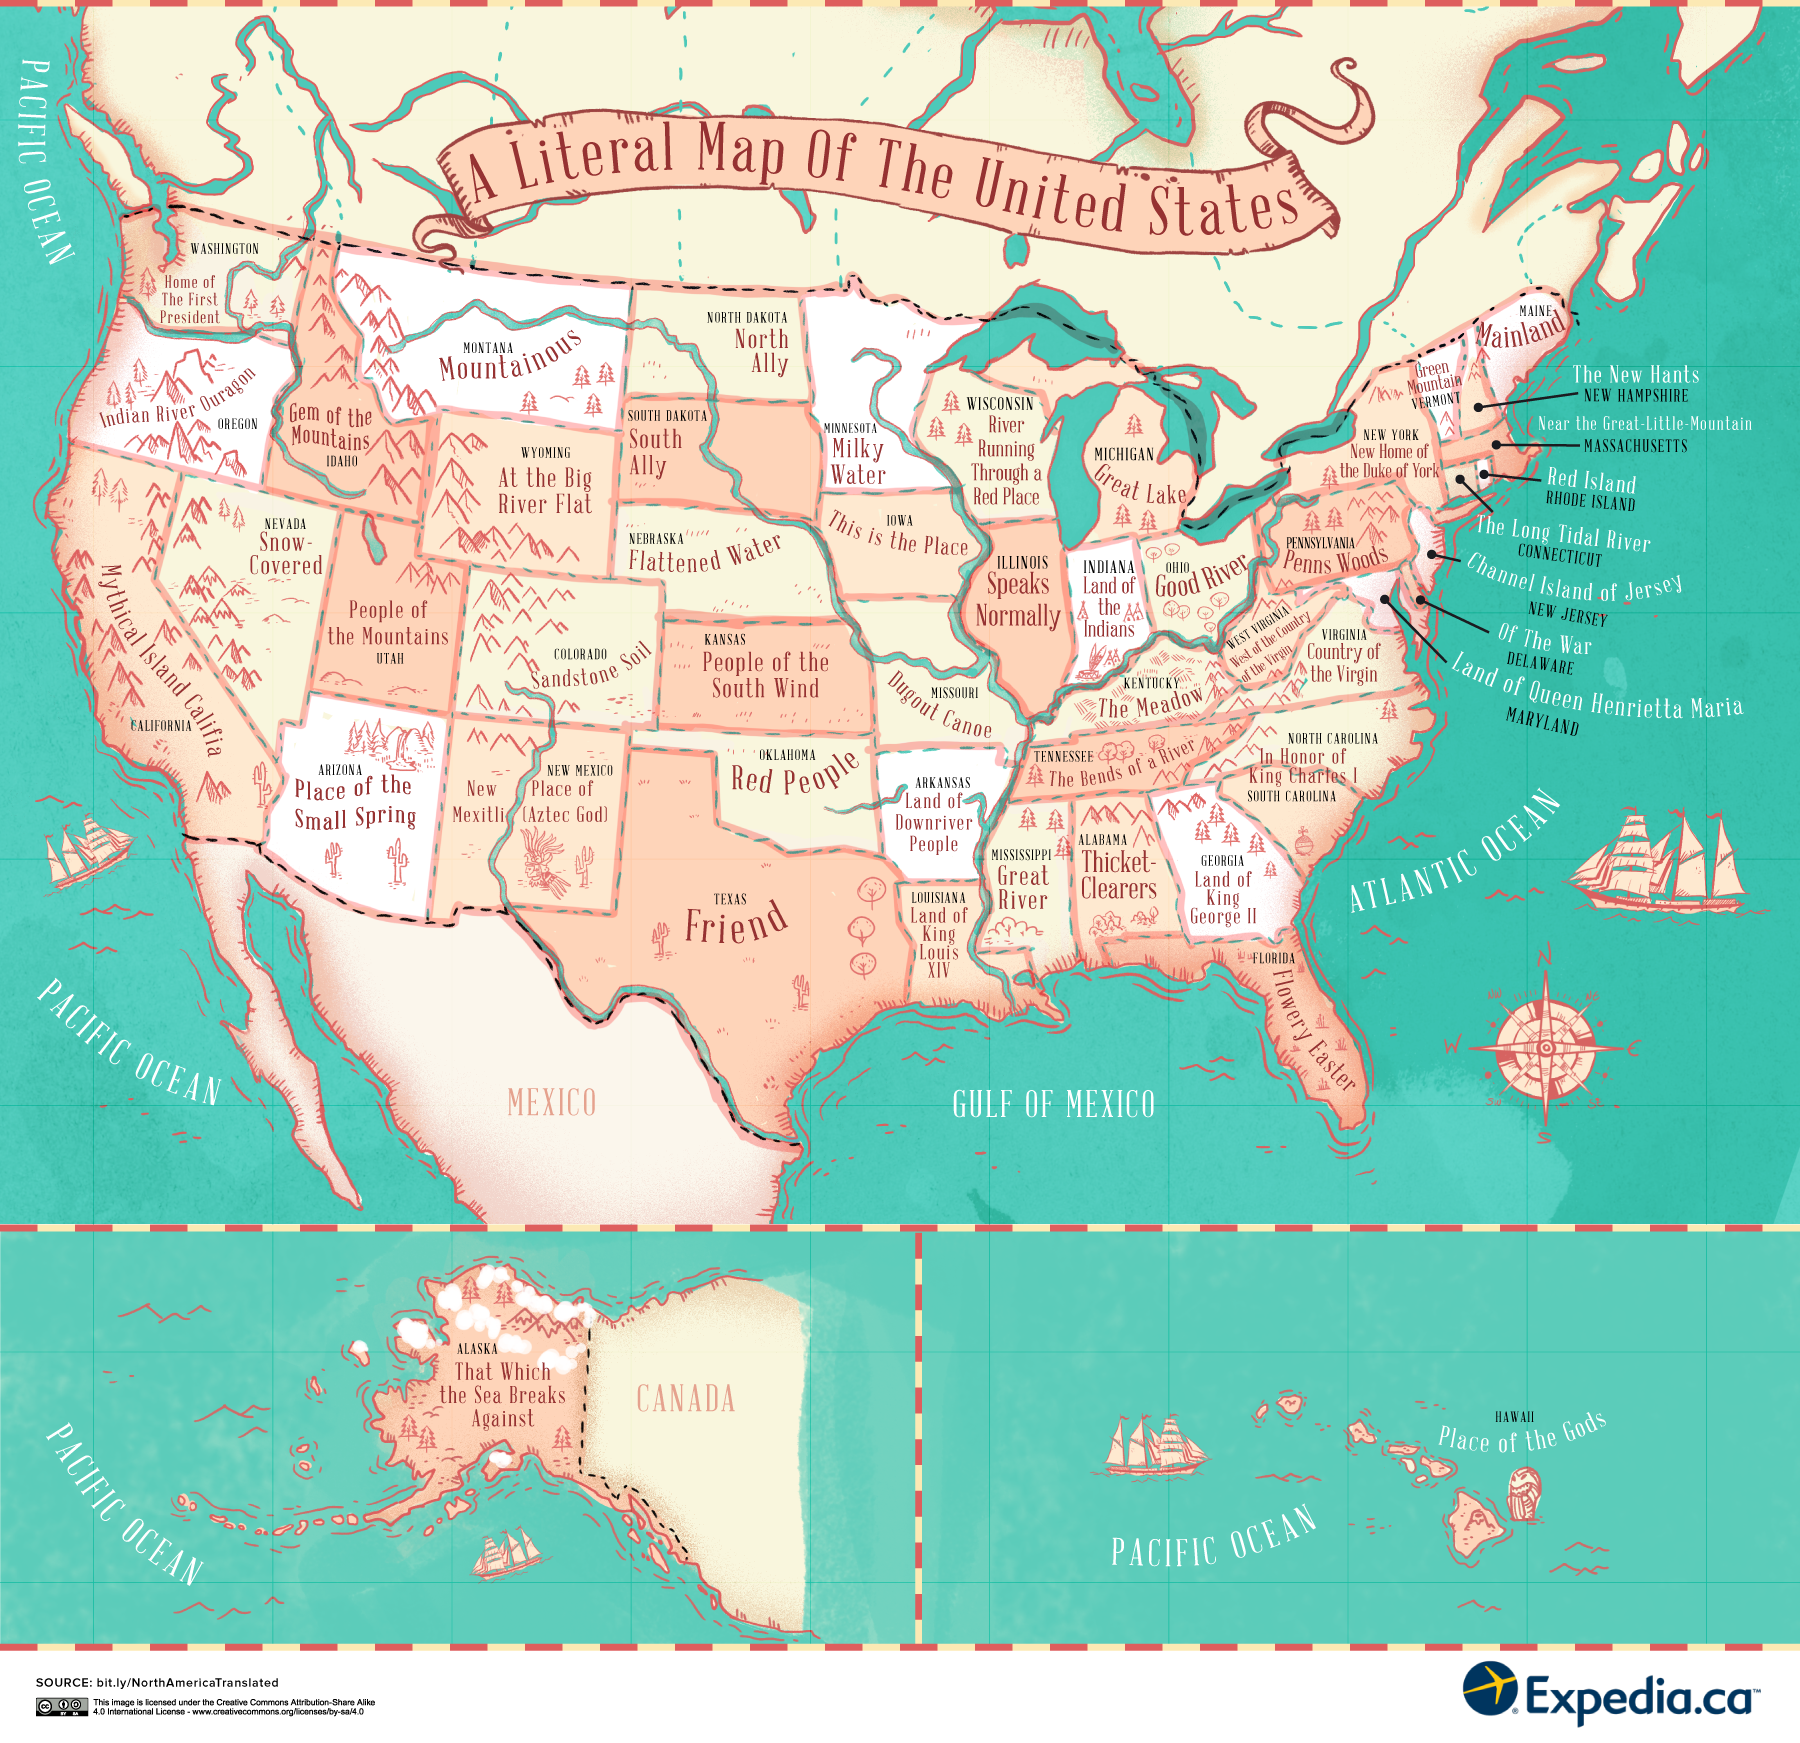 The placename map for the USA